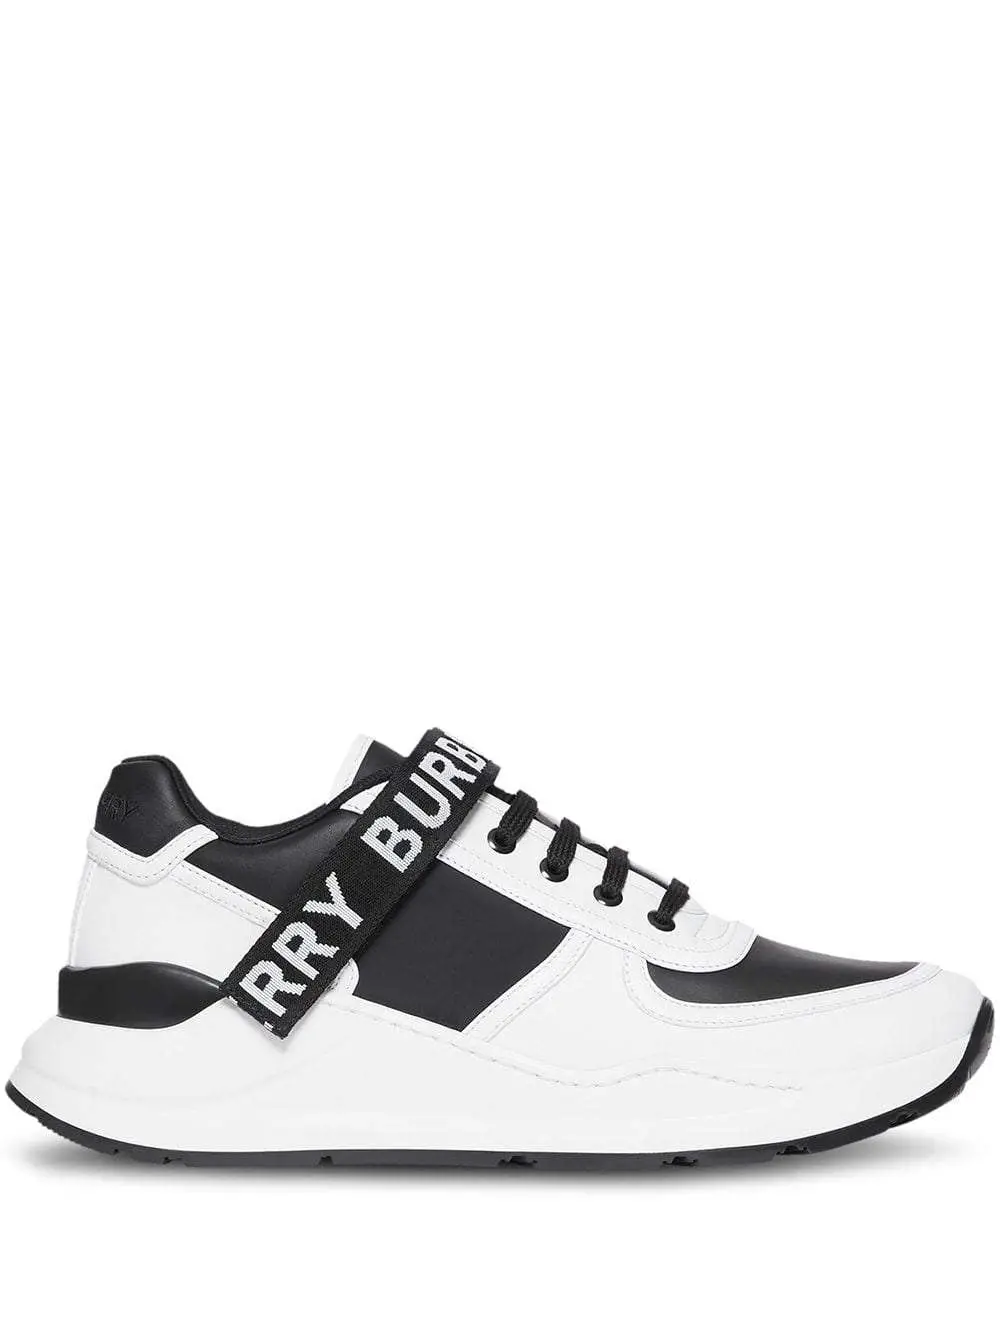 Burberry Leather And Fabric Black And White Sneakers With ...